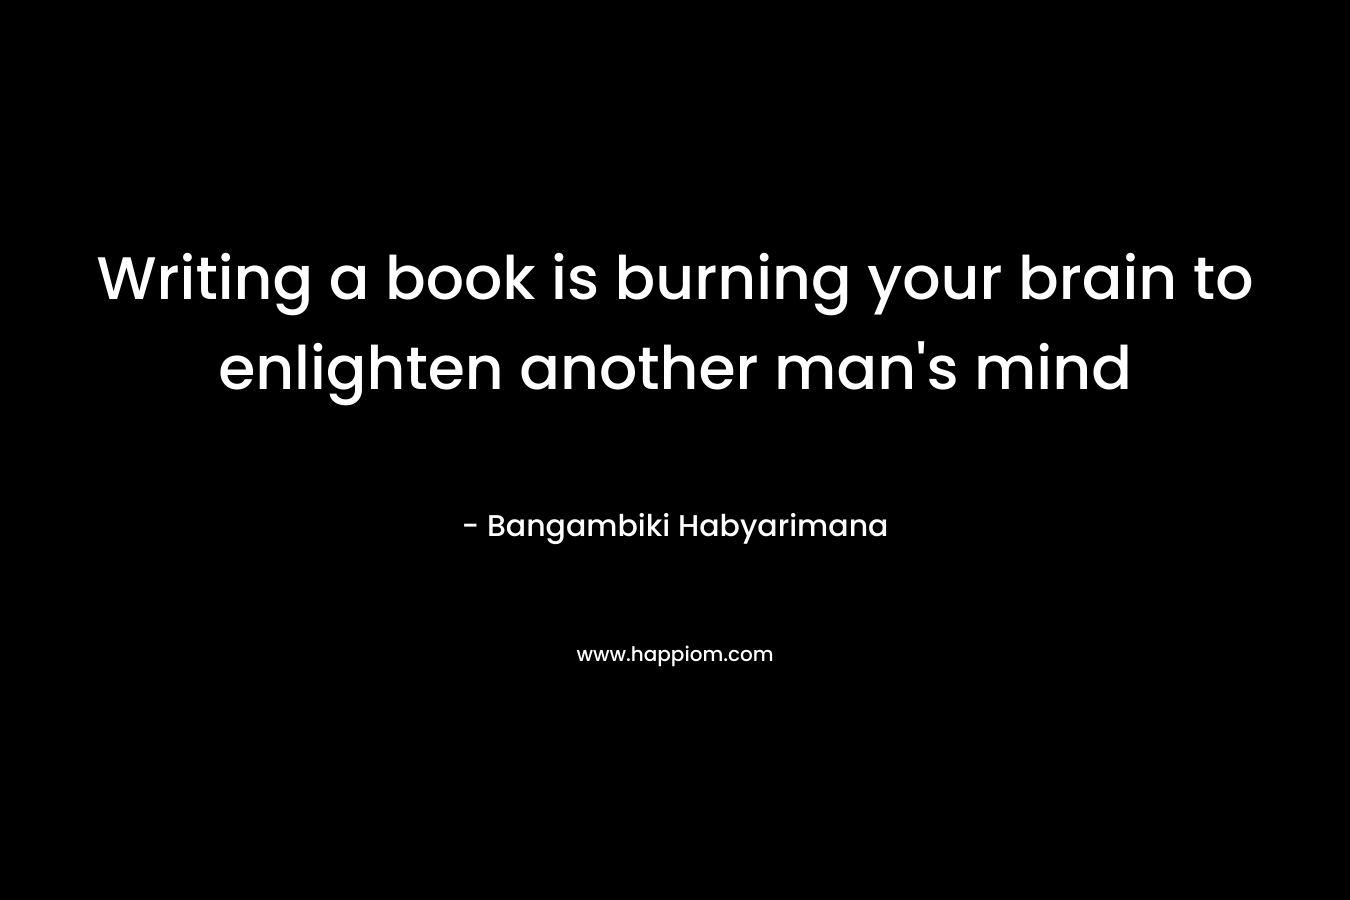 Writing a book is burning your brain to enlighten another man’s mind – Bangambiki Habyarimana